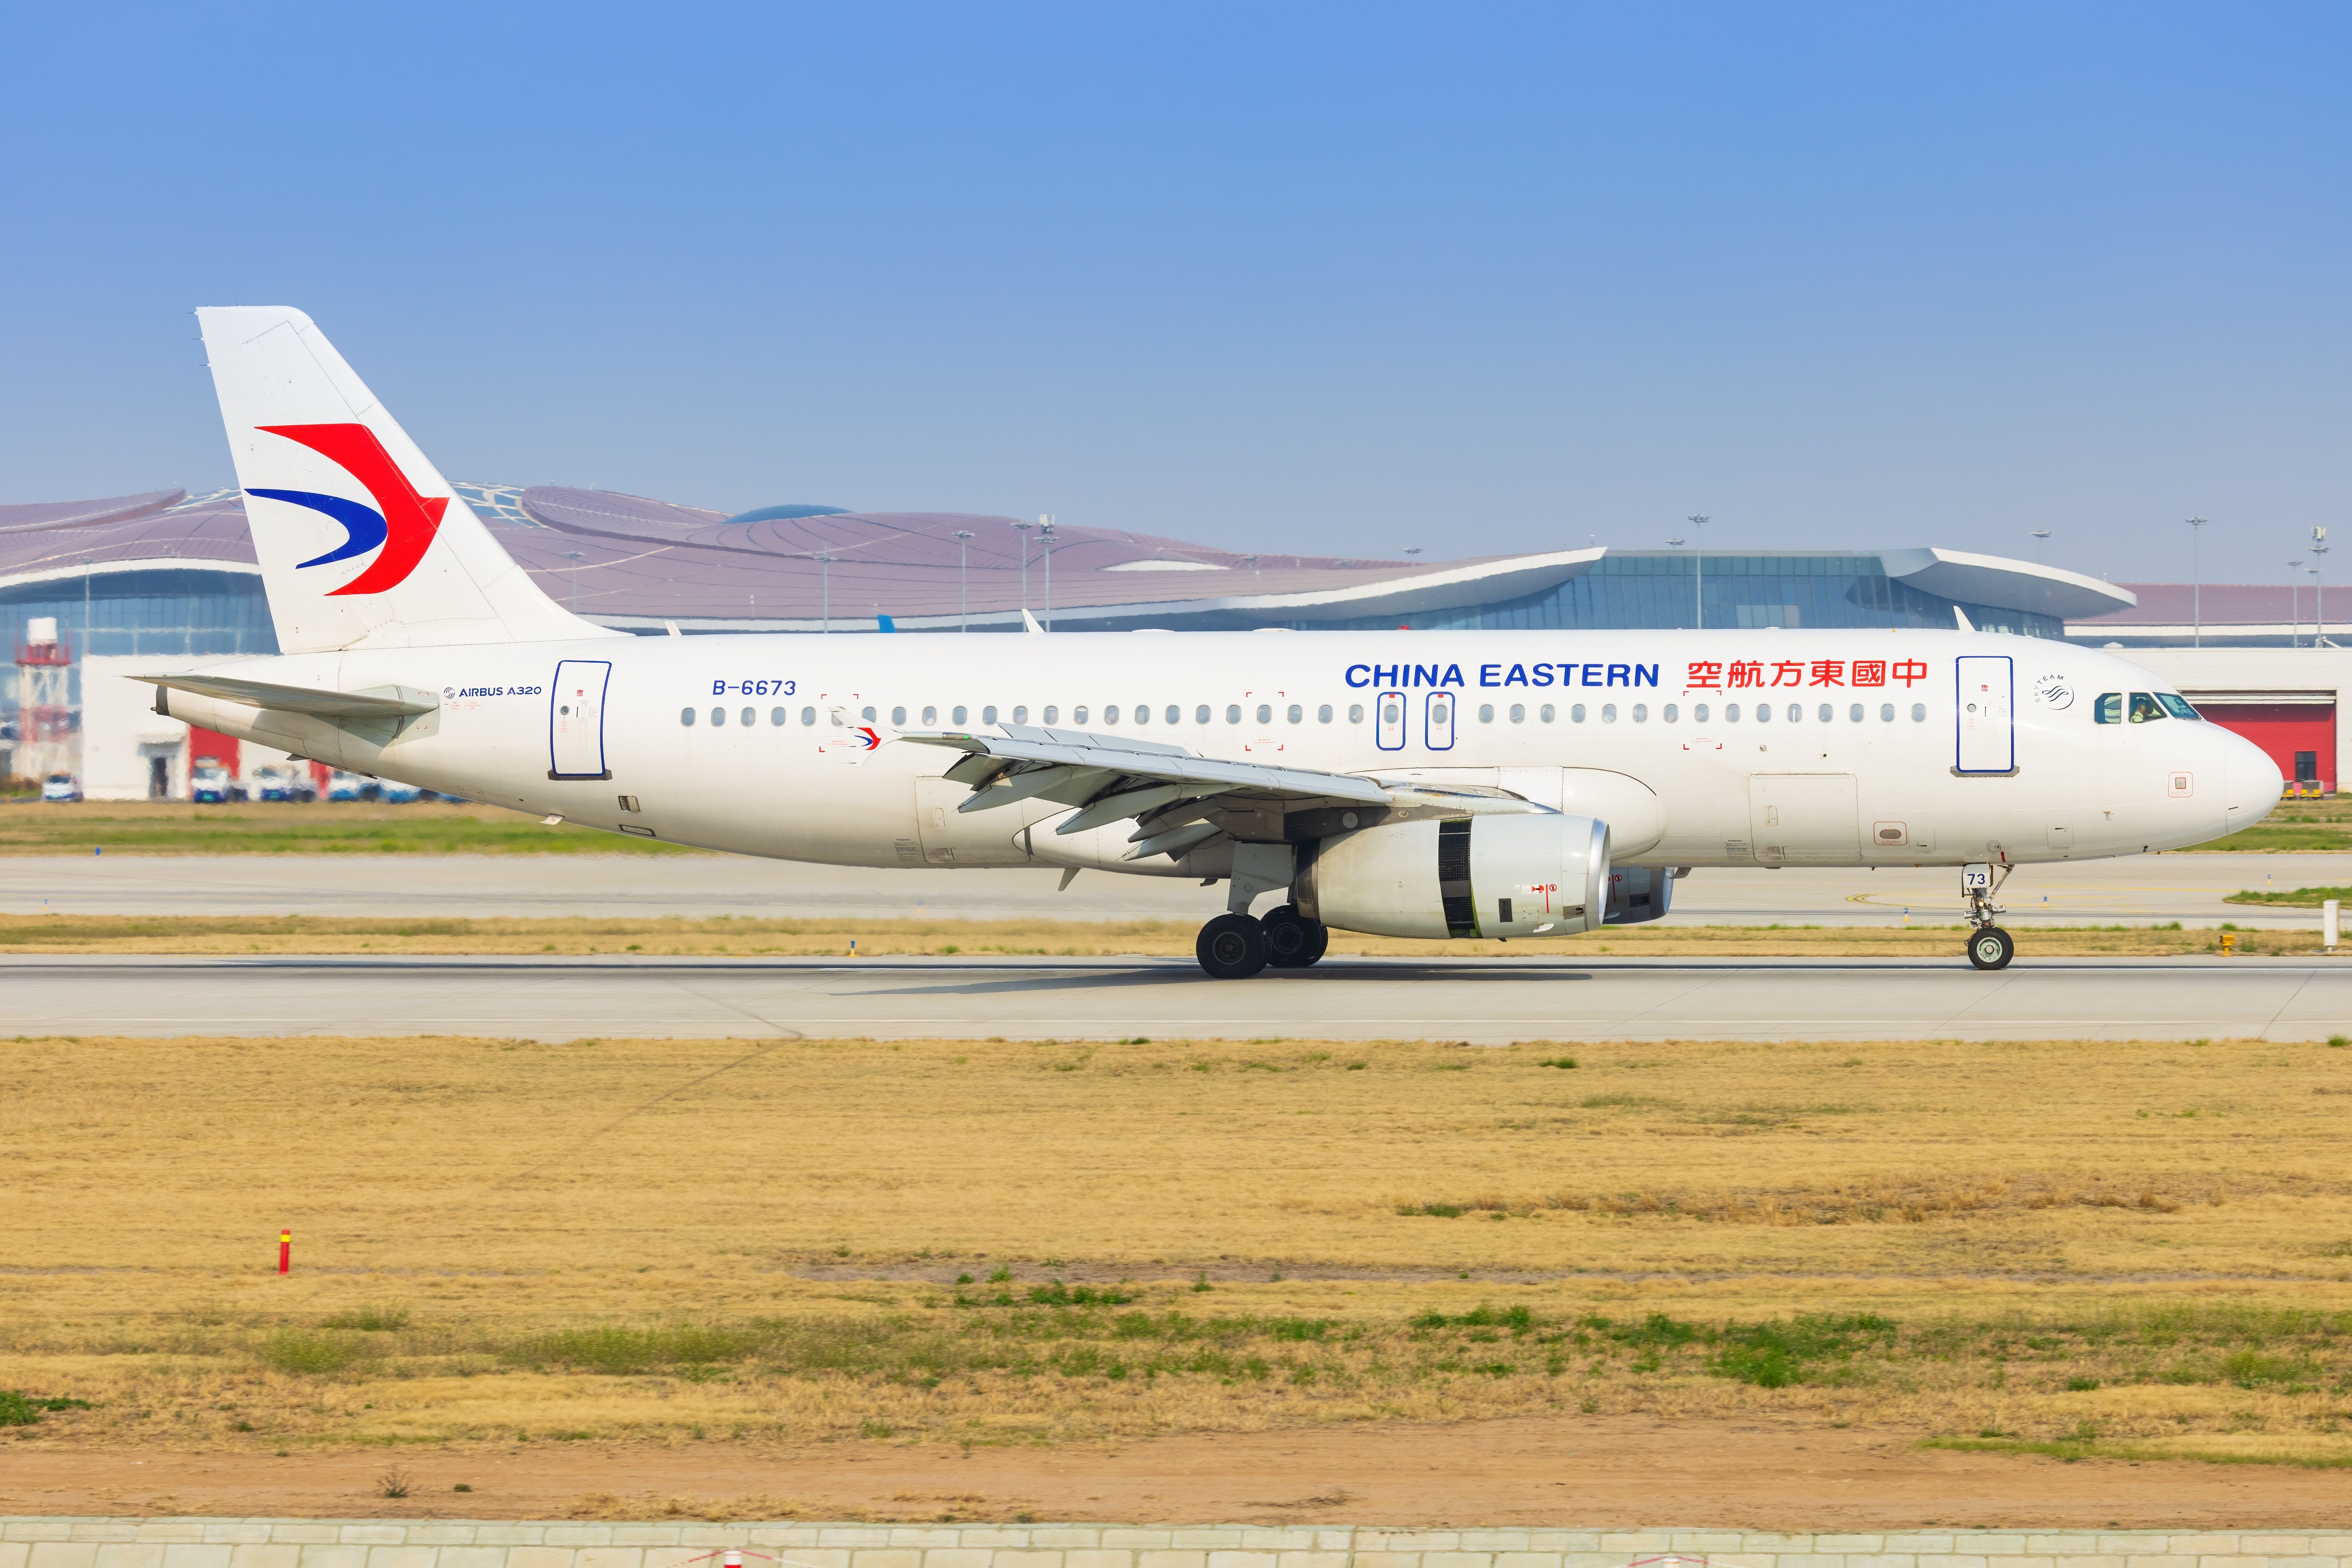 China Eastern A320 on ground